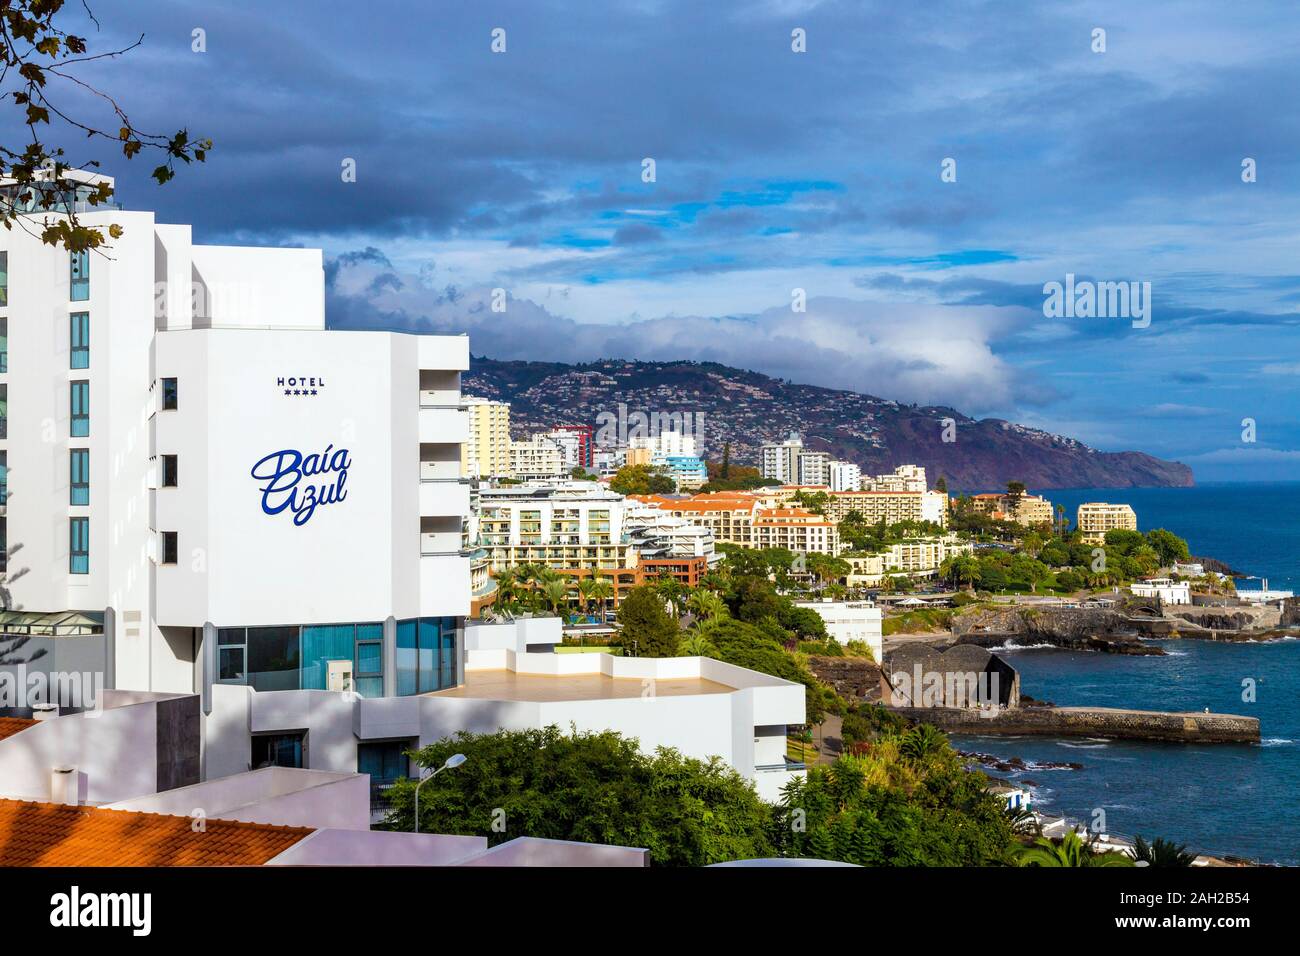 Hotel Baía Azul and resorts along the coast in Funchal, Madeira, Portugal Stock Photo